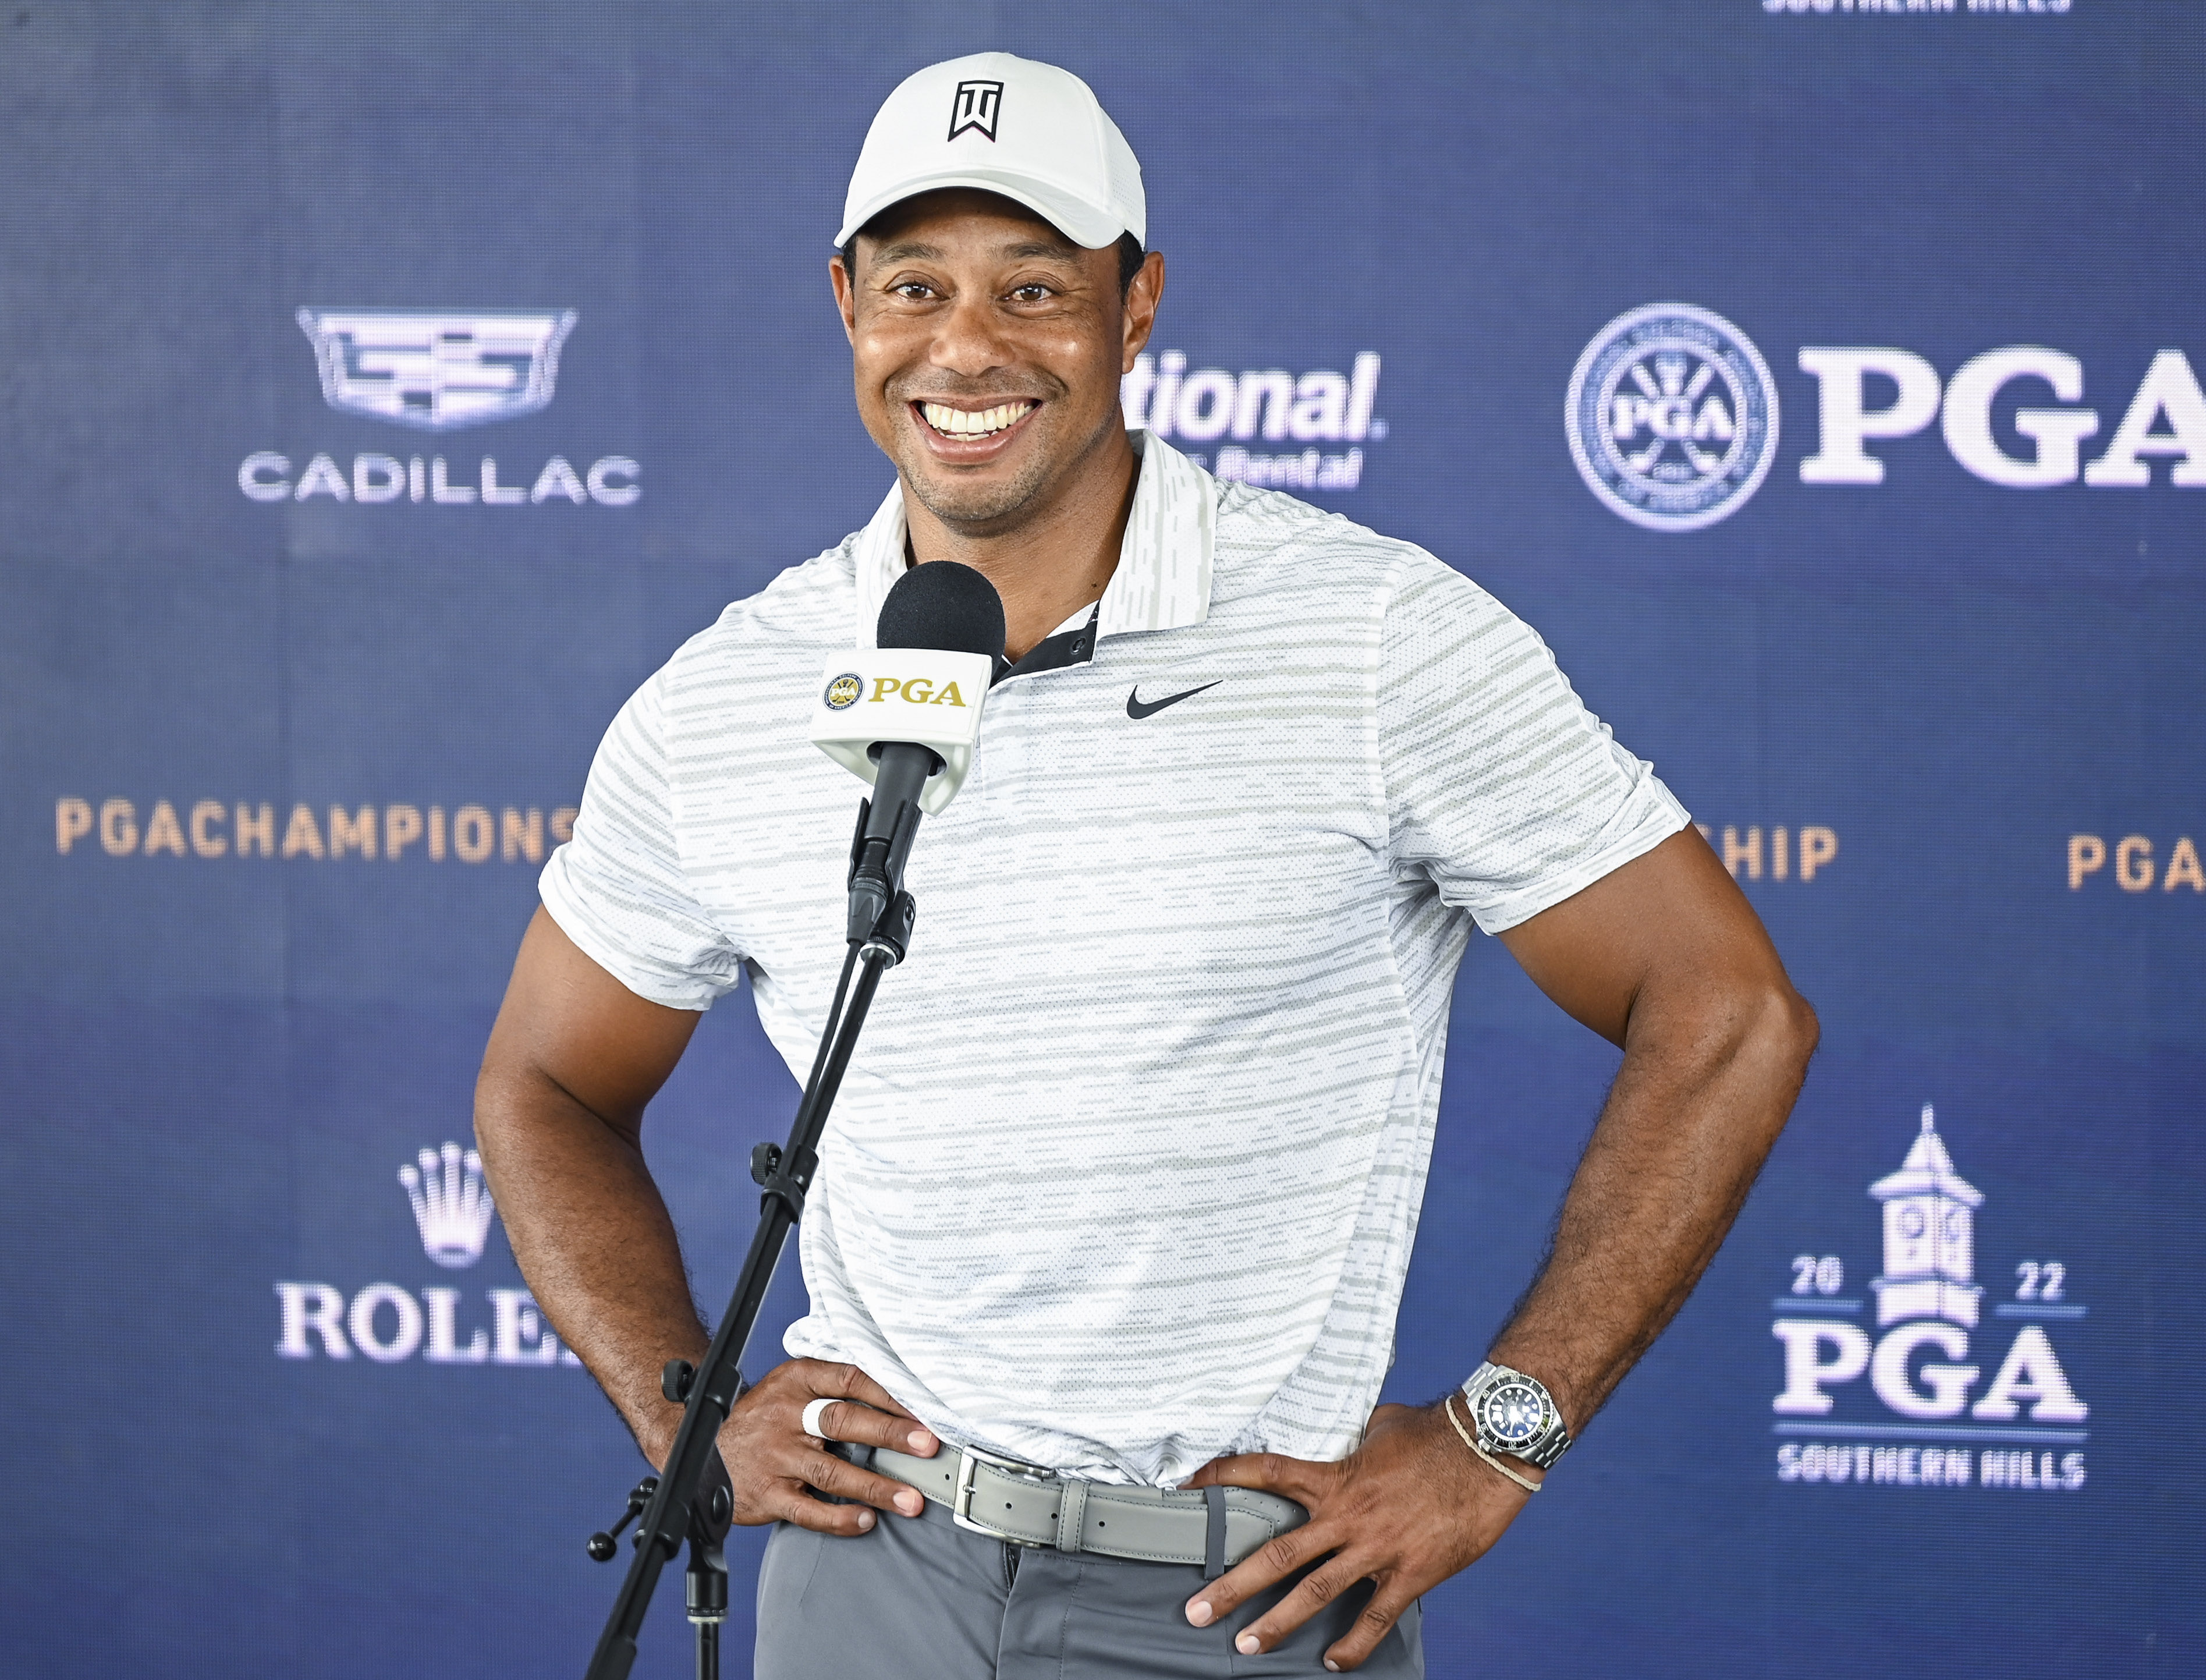 PGA Championship 2022 Tiger Woods hasnt talked to Phil Mickelson and has completely different view of PGA Tour-Saudi dynamic Golf News and Tour Information GolfDigest